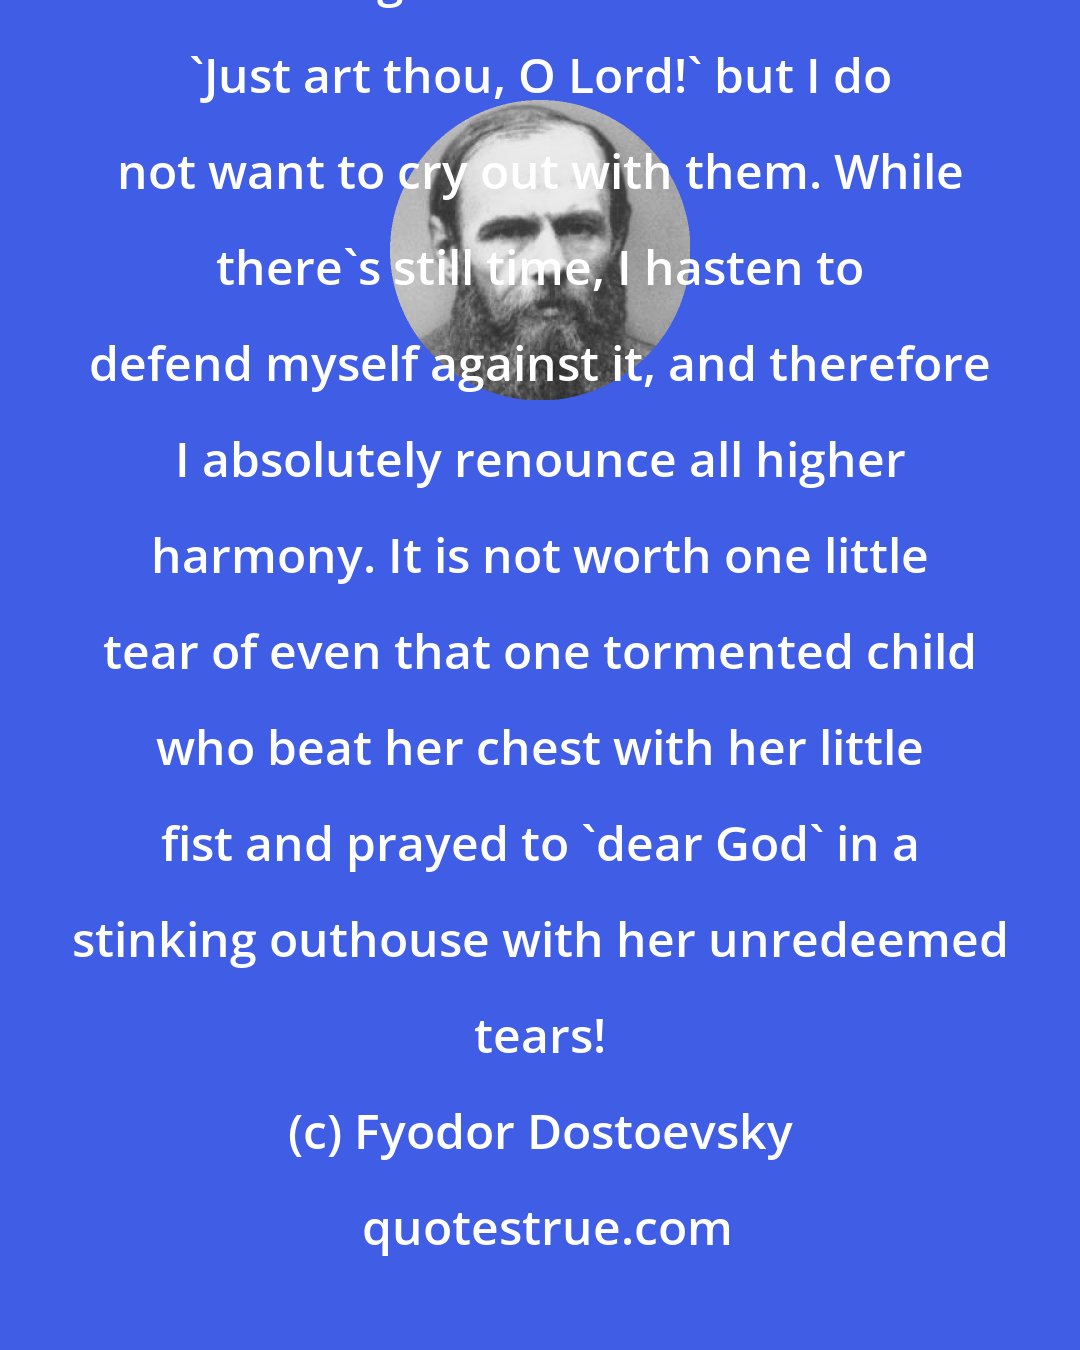 Fyodor Dostoevsky: I myself will perhaps cry out with all the rest, looking at the mother embracing her child's tormentor: 'Just art thou, O Lord!' but I do not want to cry out with them. While there's still time, I hasten to defend myself against it, and therefore I absolutely renounce all higher harmony. It is not worth one little tear of even that one tormented child who beat her chest with her little fist and prayed to 'dear God' in a stinking outhouse with her unredeemed tears!